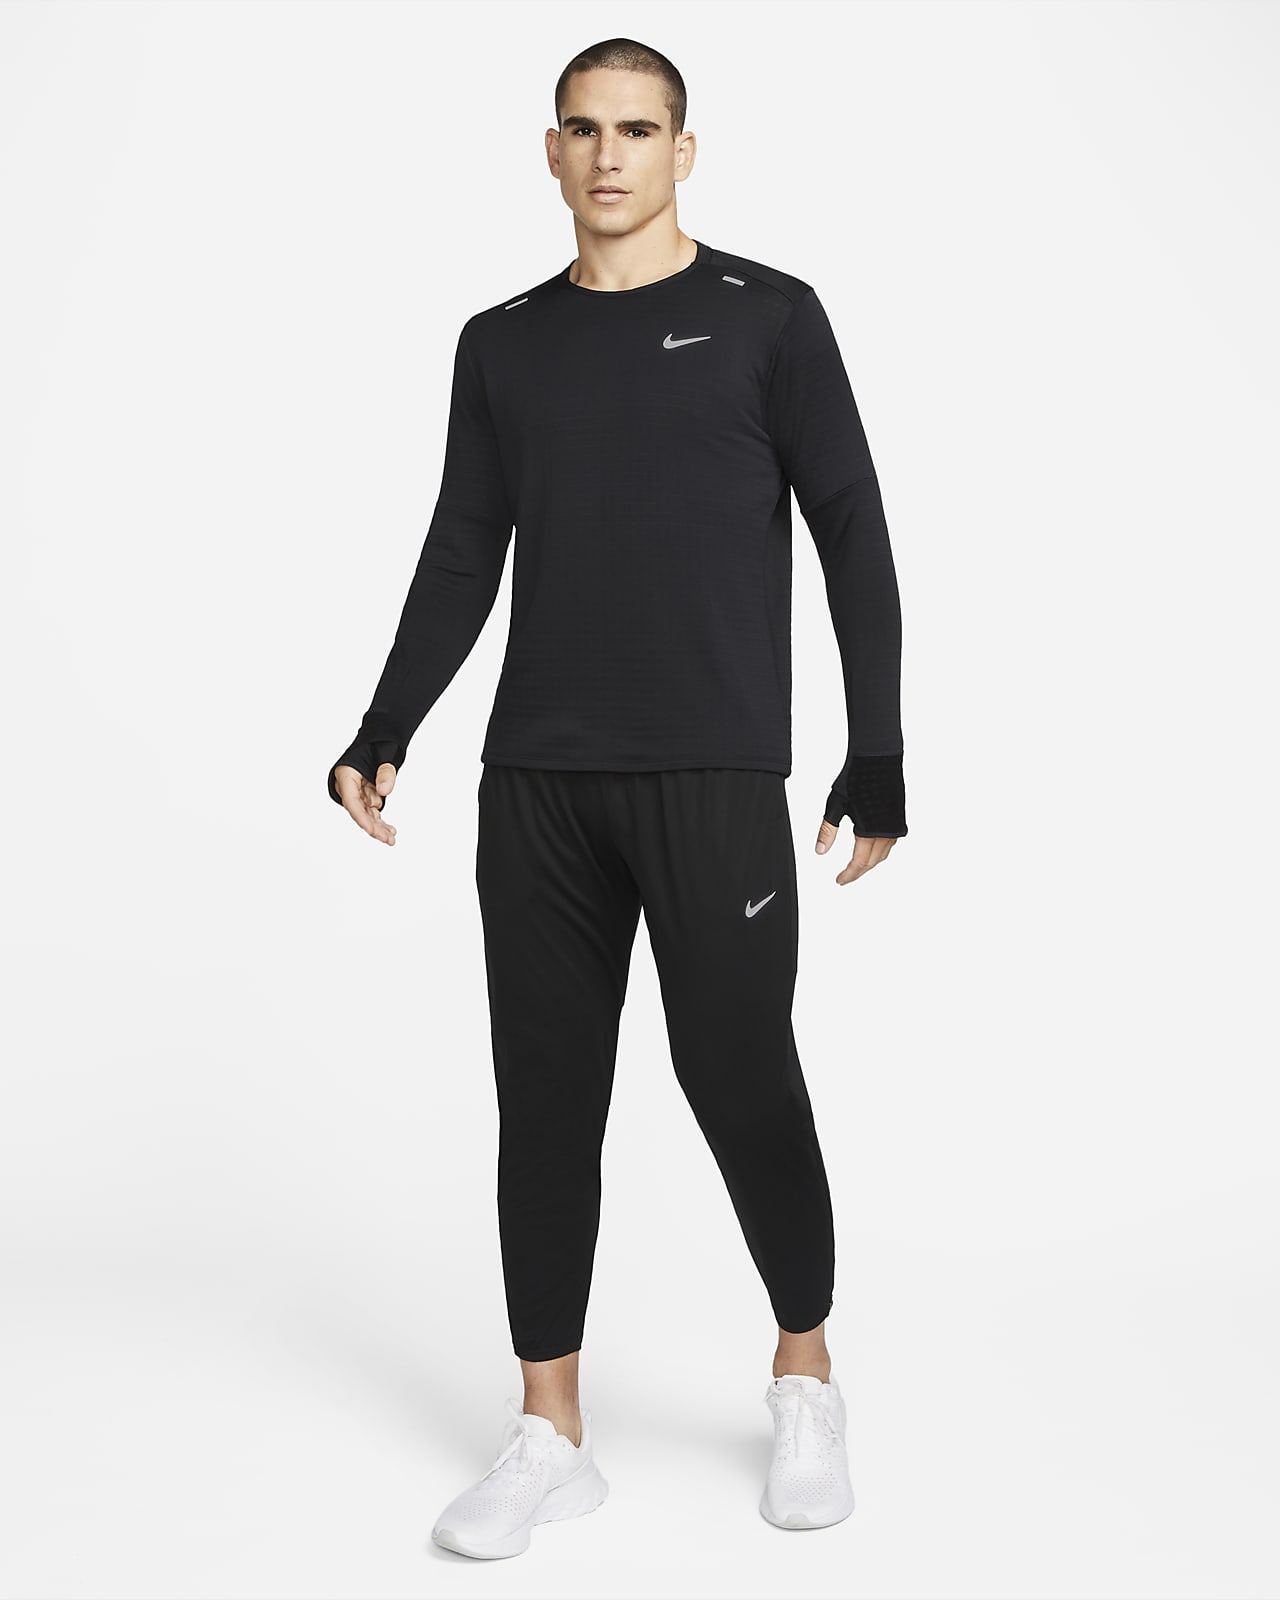 Nike Men's Repel Challenger Running Tights, Black Size Small